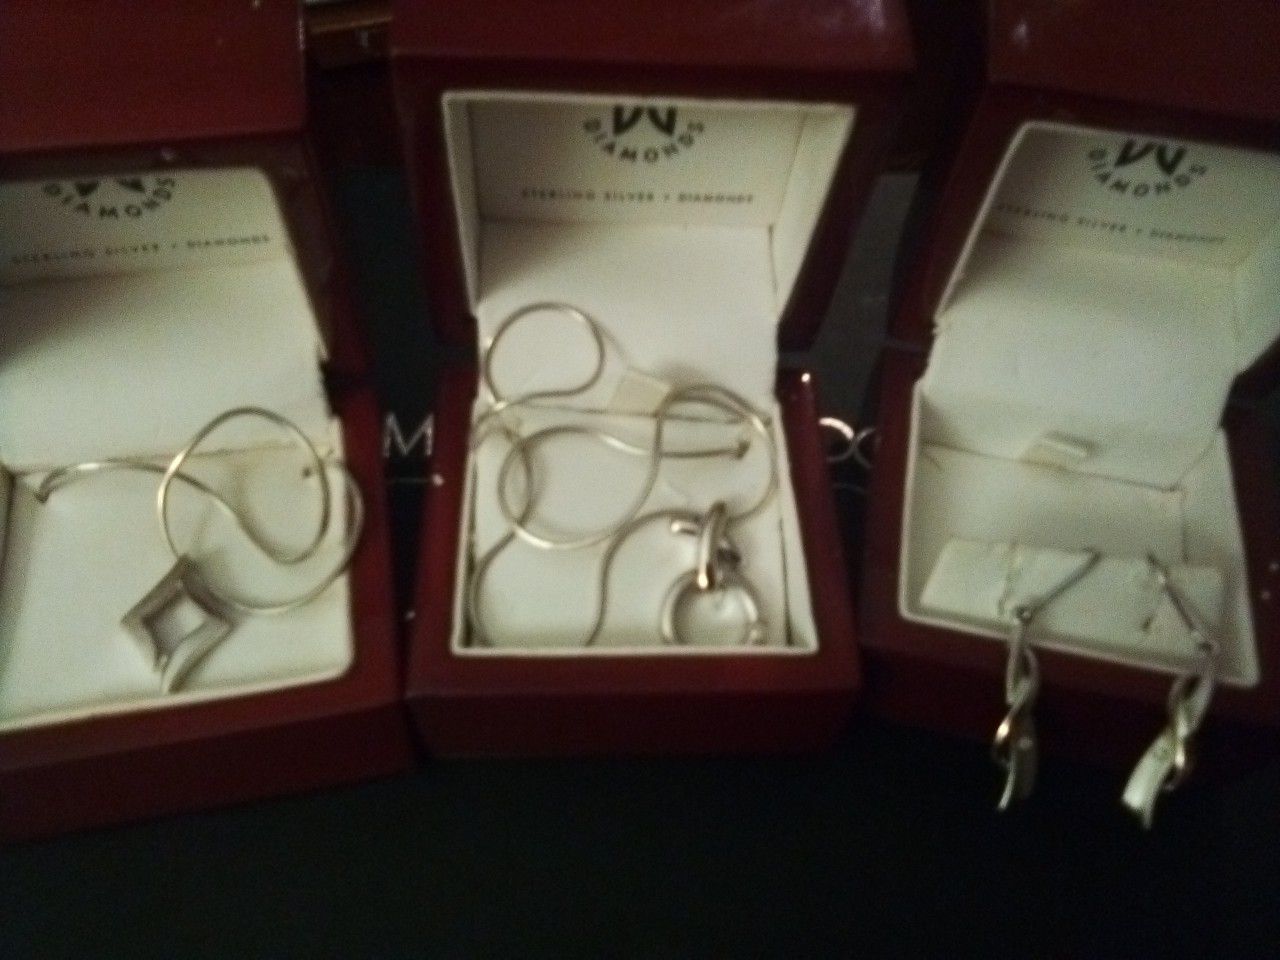 New Sterling Silver necklaces and earrings with diamonds